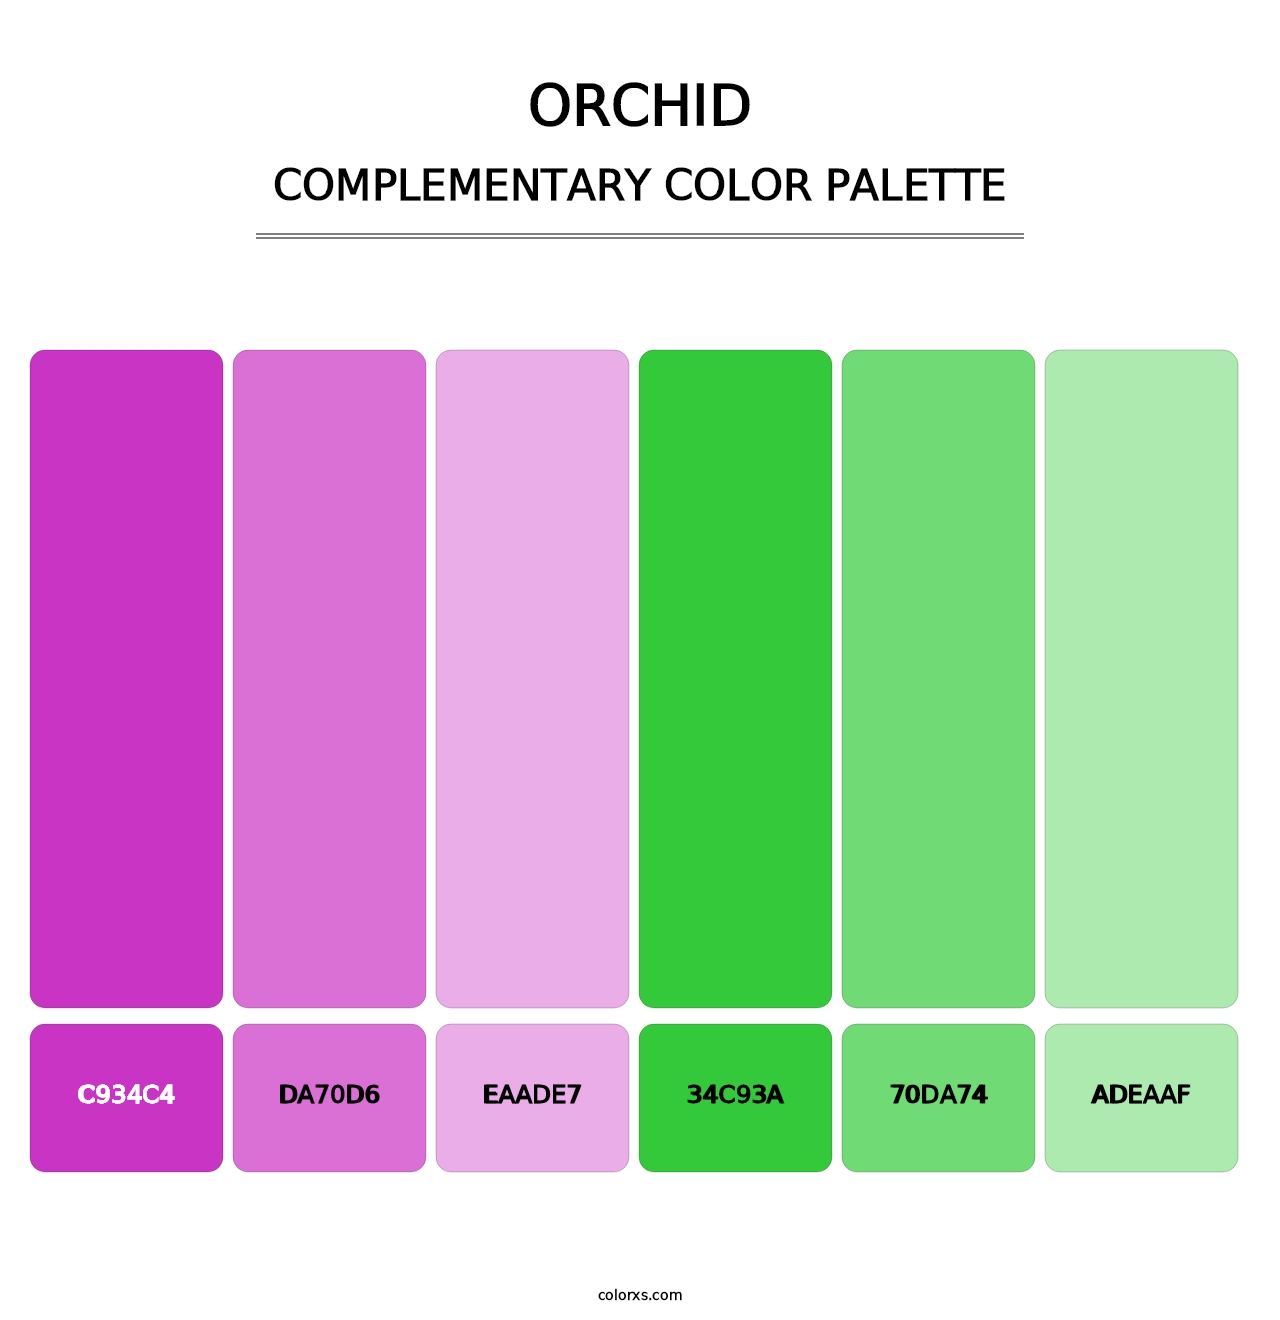 Orchid - Complementary Color Palette